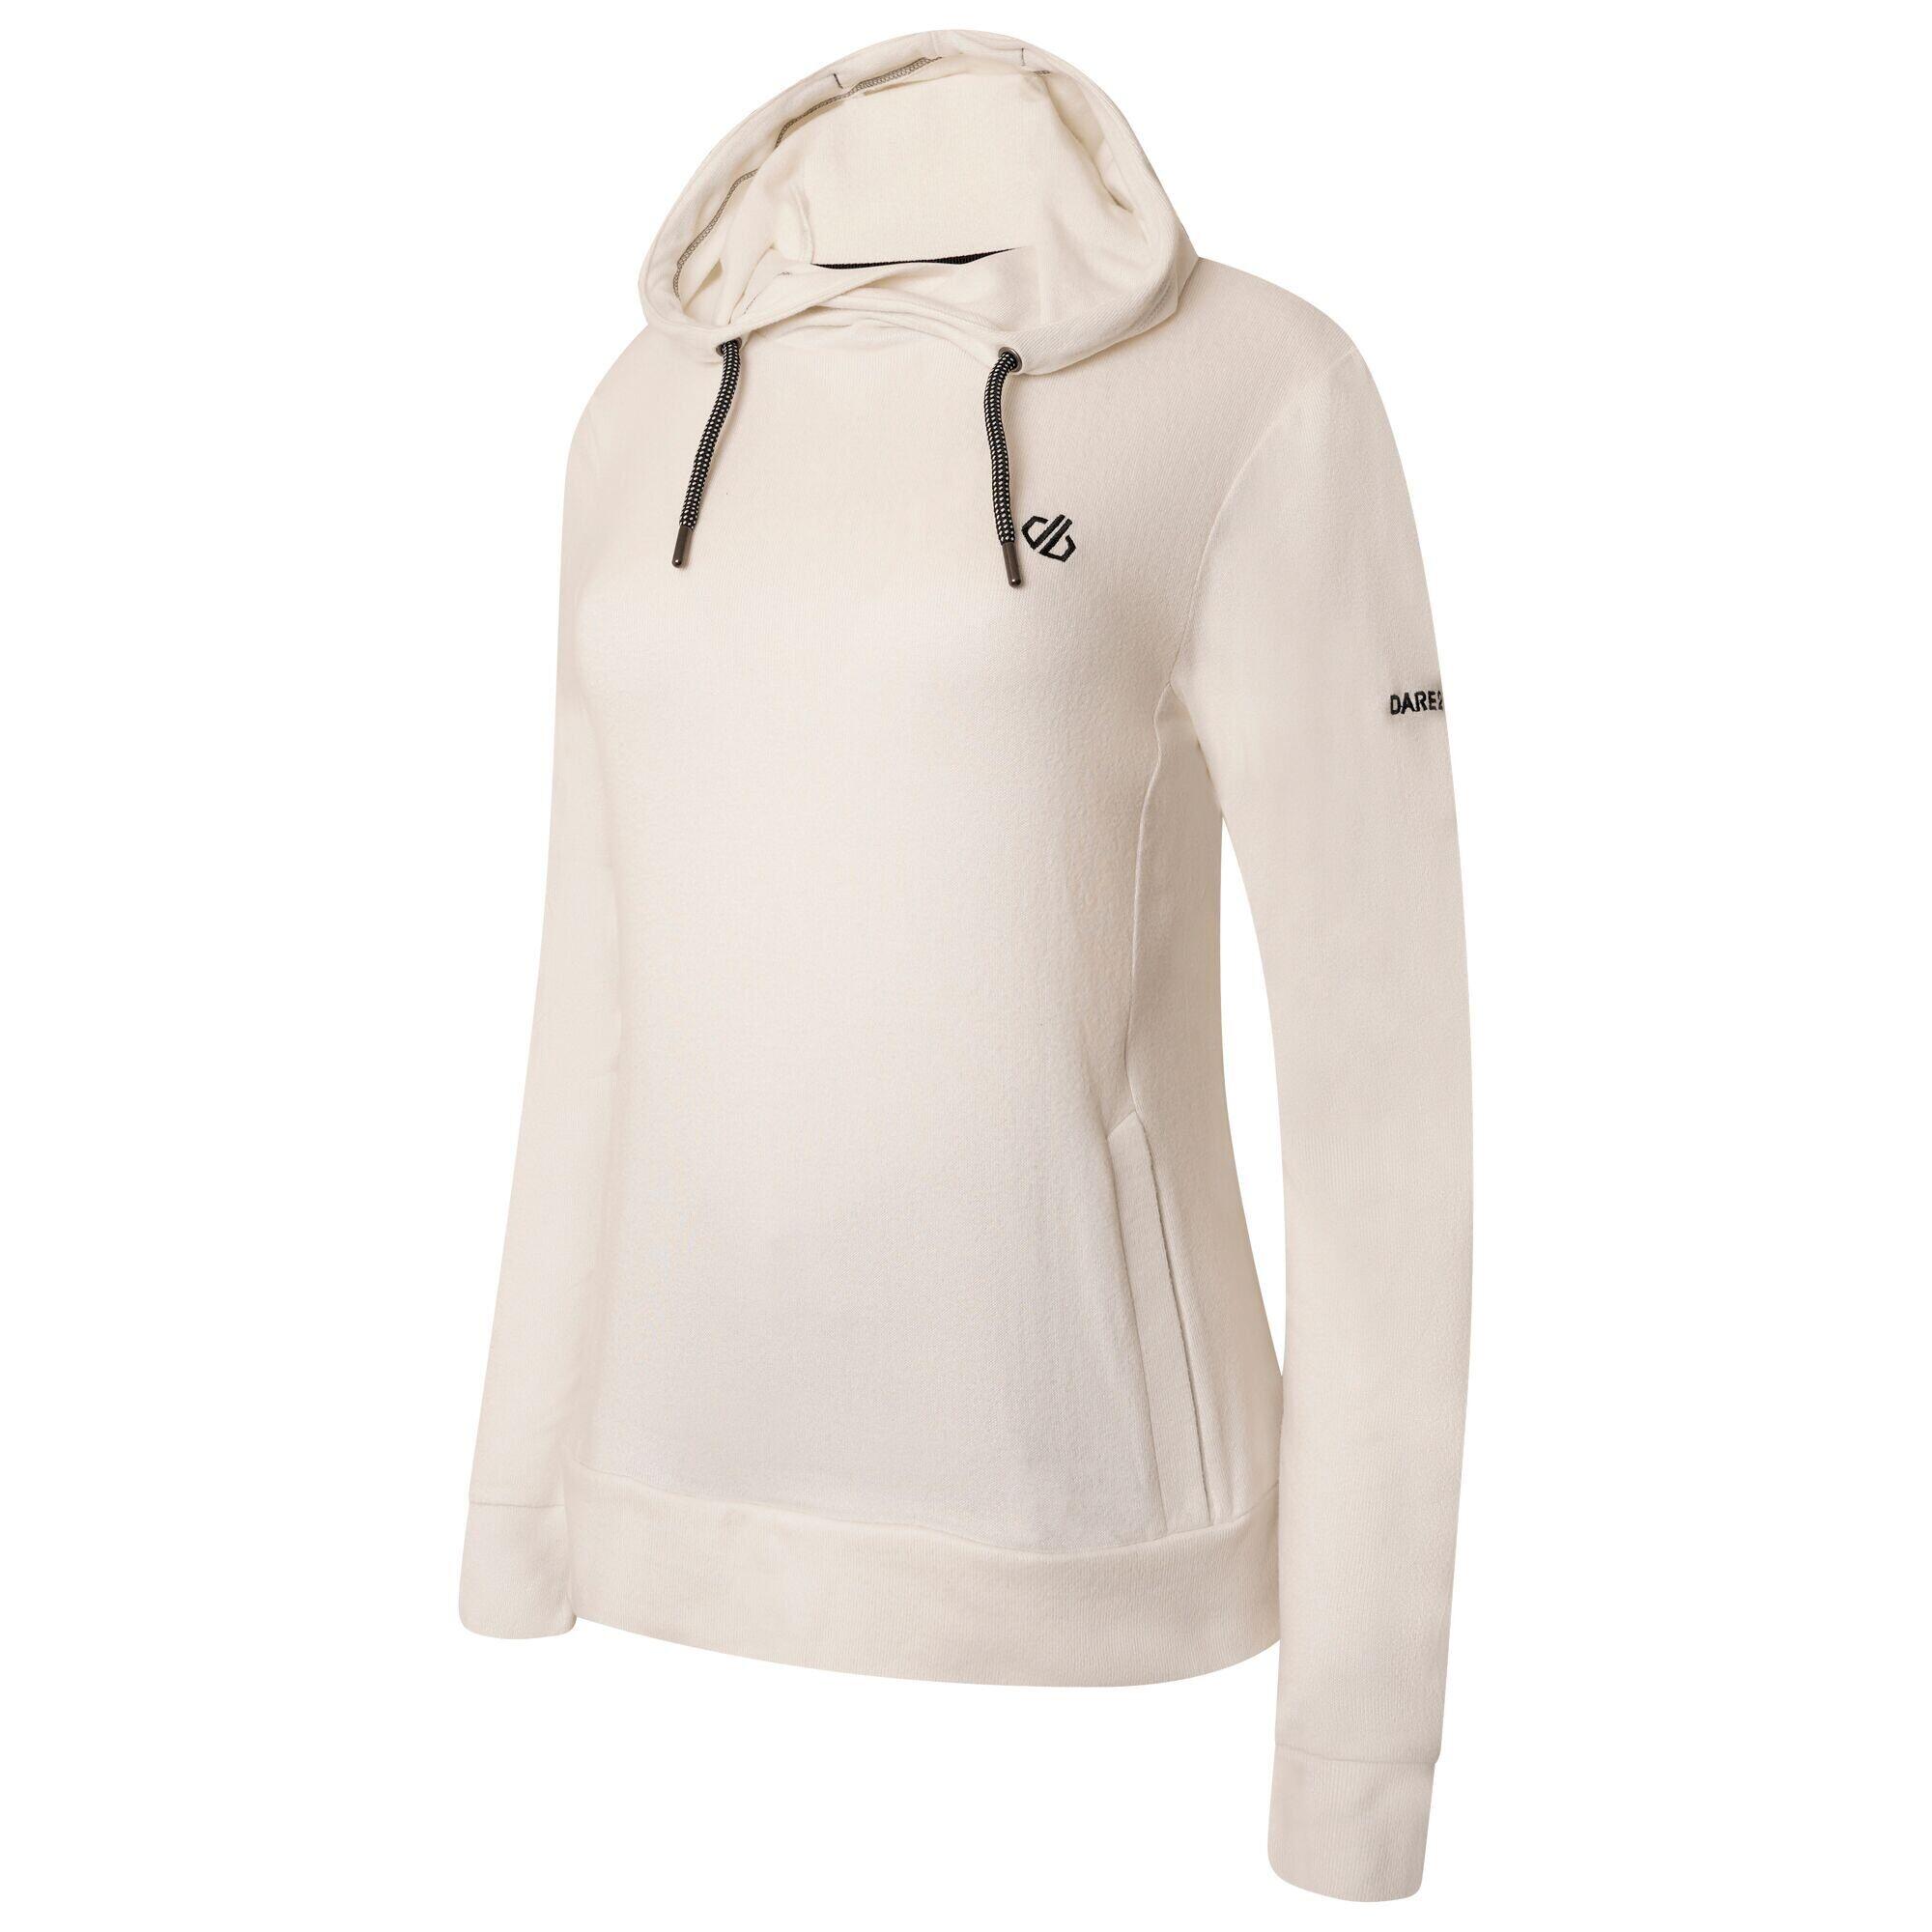 Womens/Ladies Out & Out Marl Fleece Hoodie (Lily White) 2/5